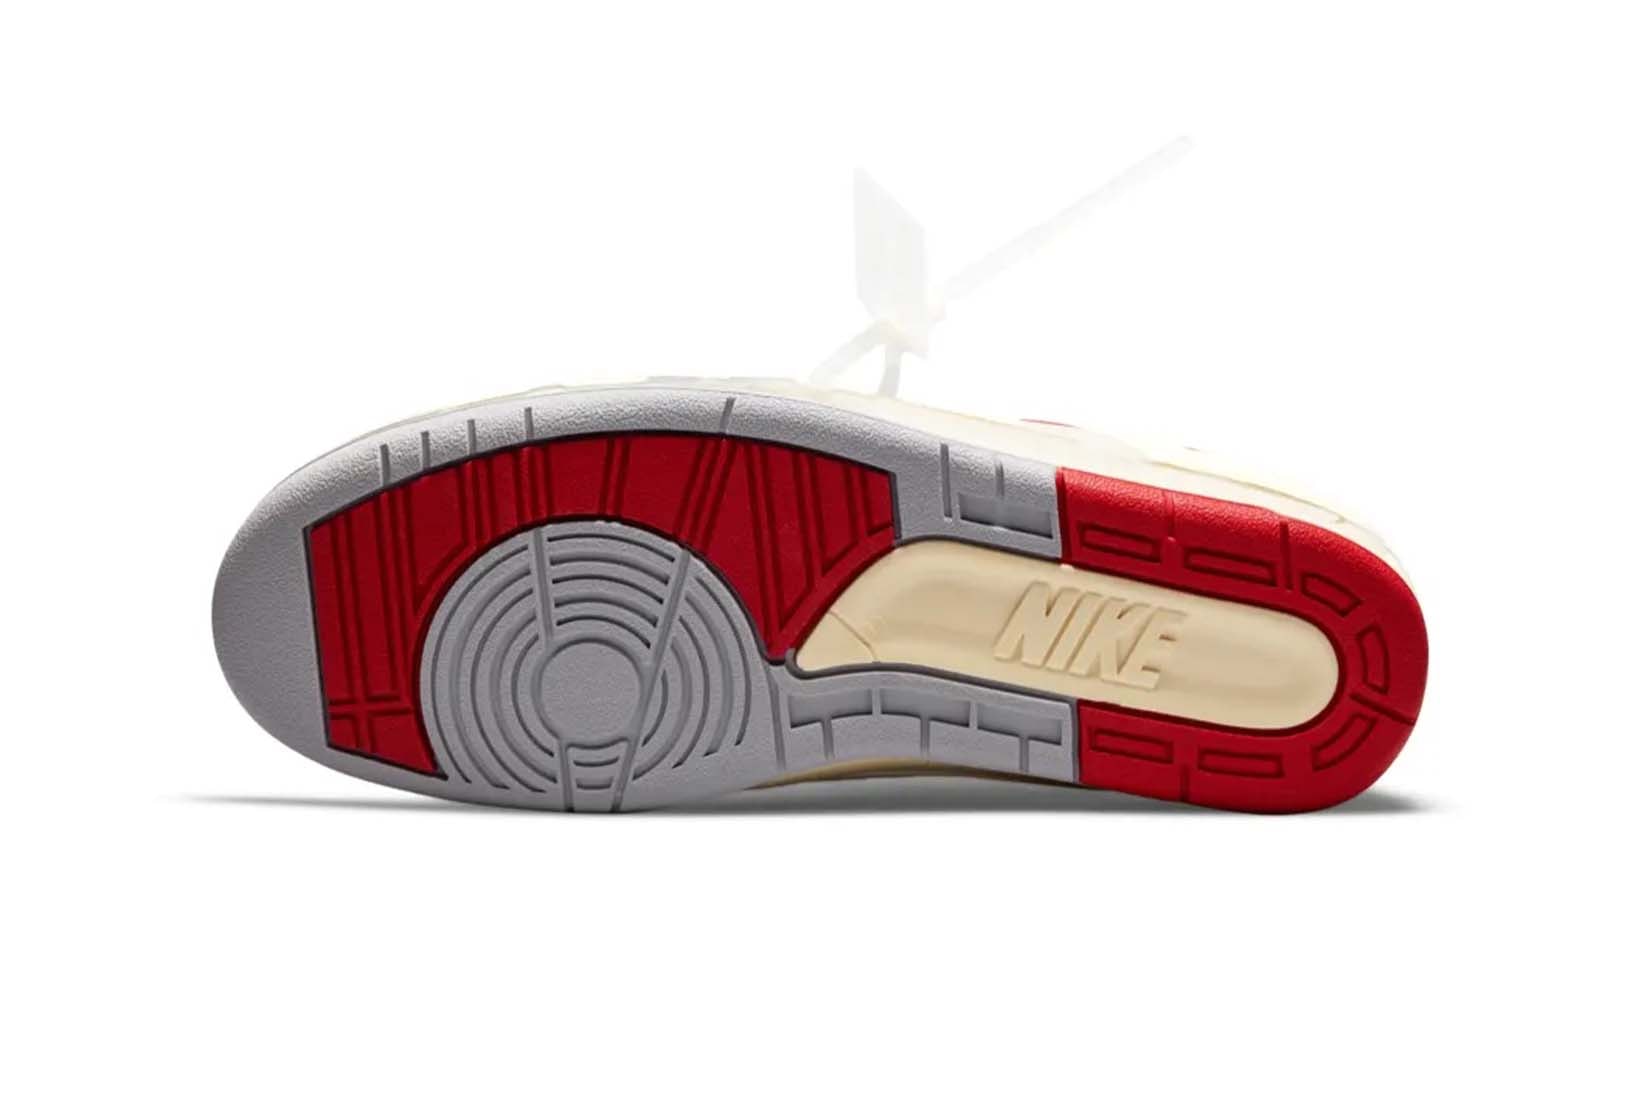 Off-White Virgil Abloh Jordan 2 White/Red Outsole Collaboration Release Date